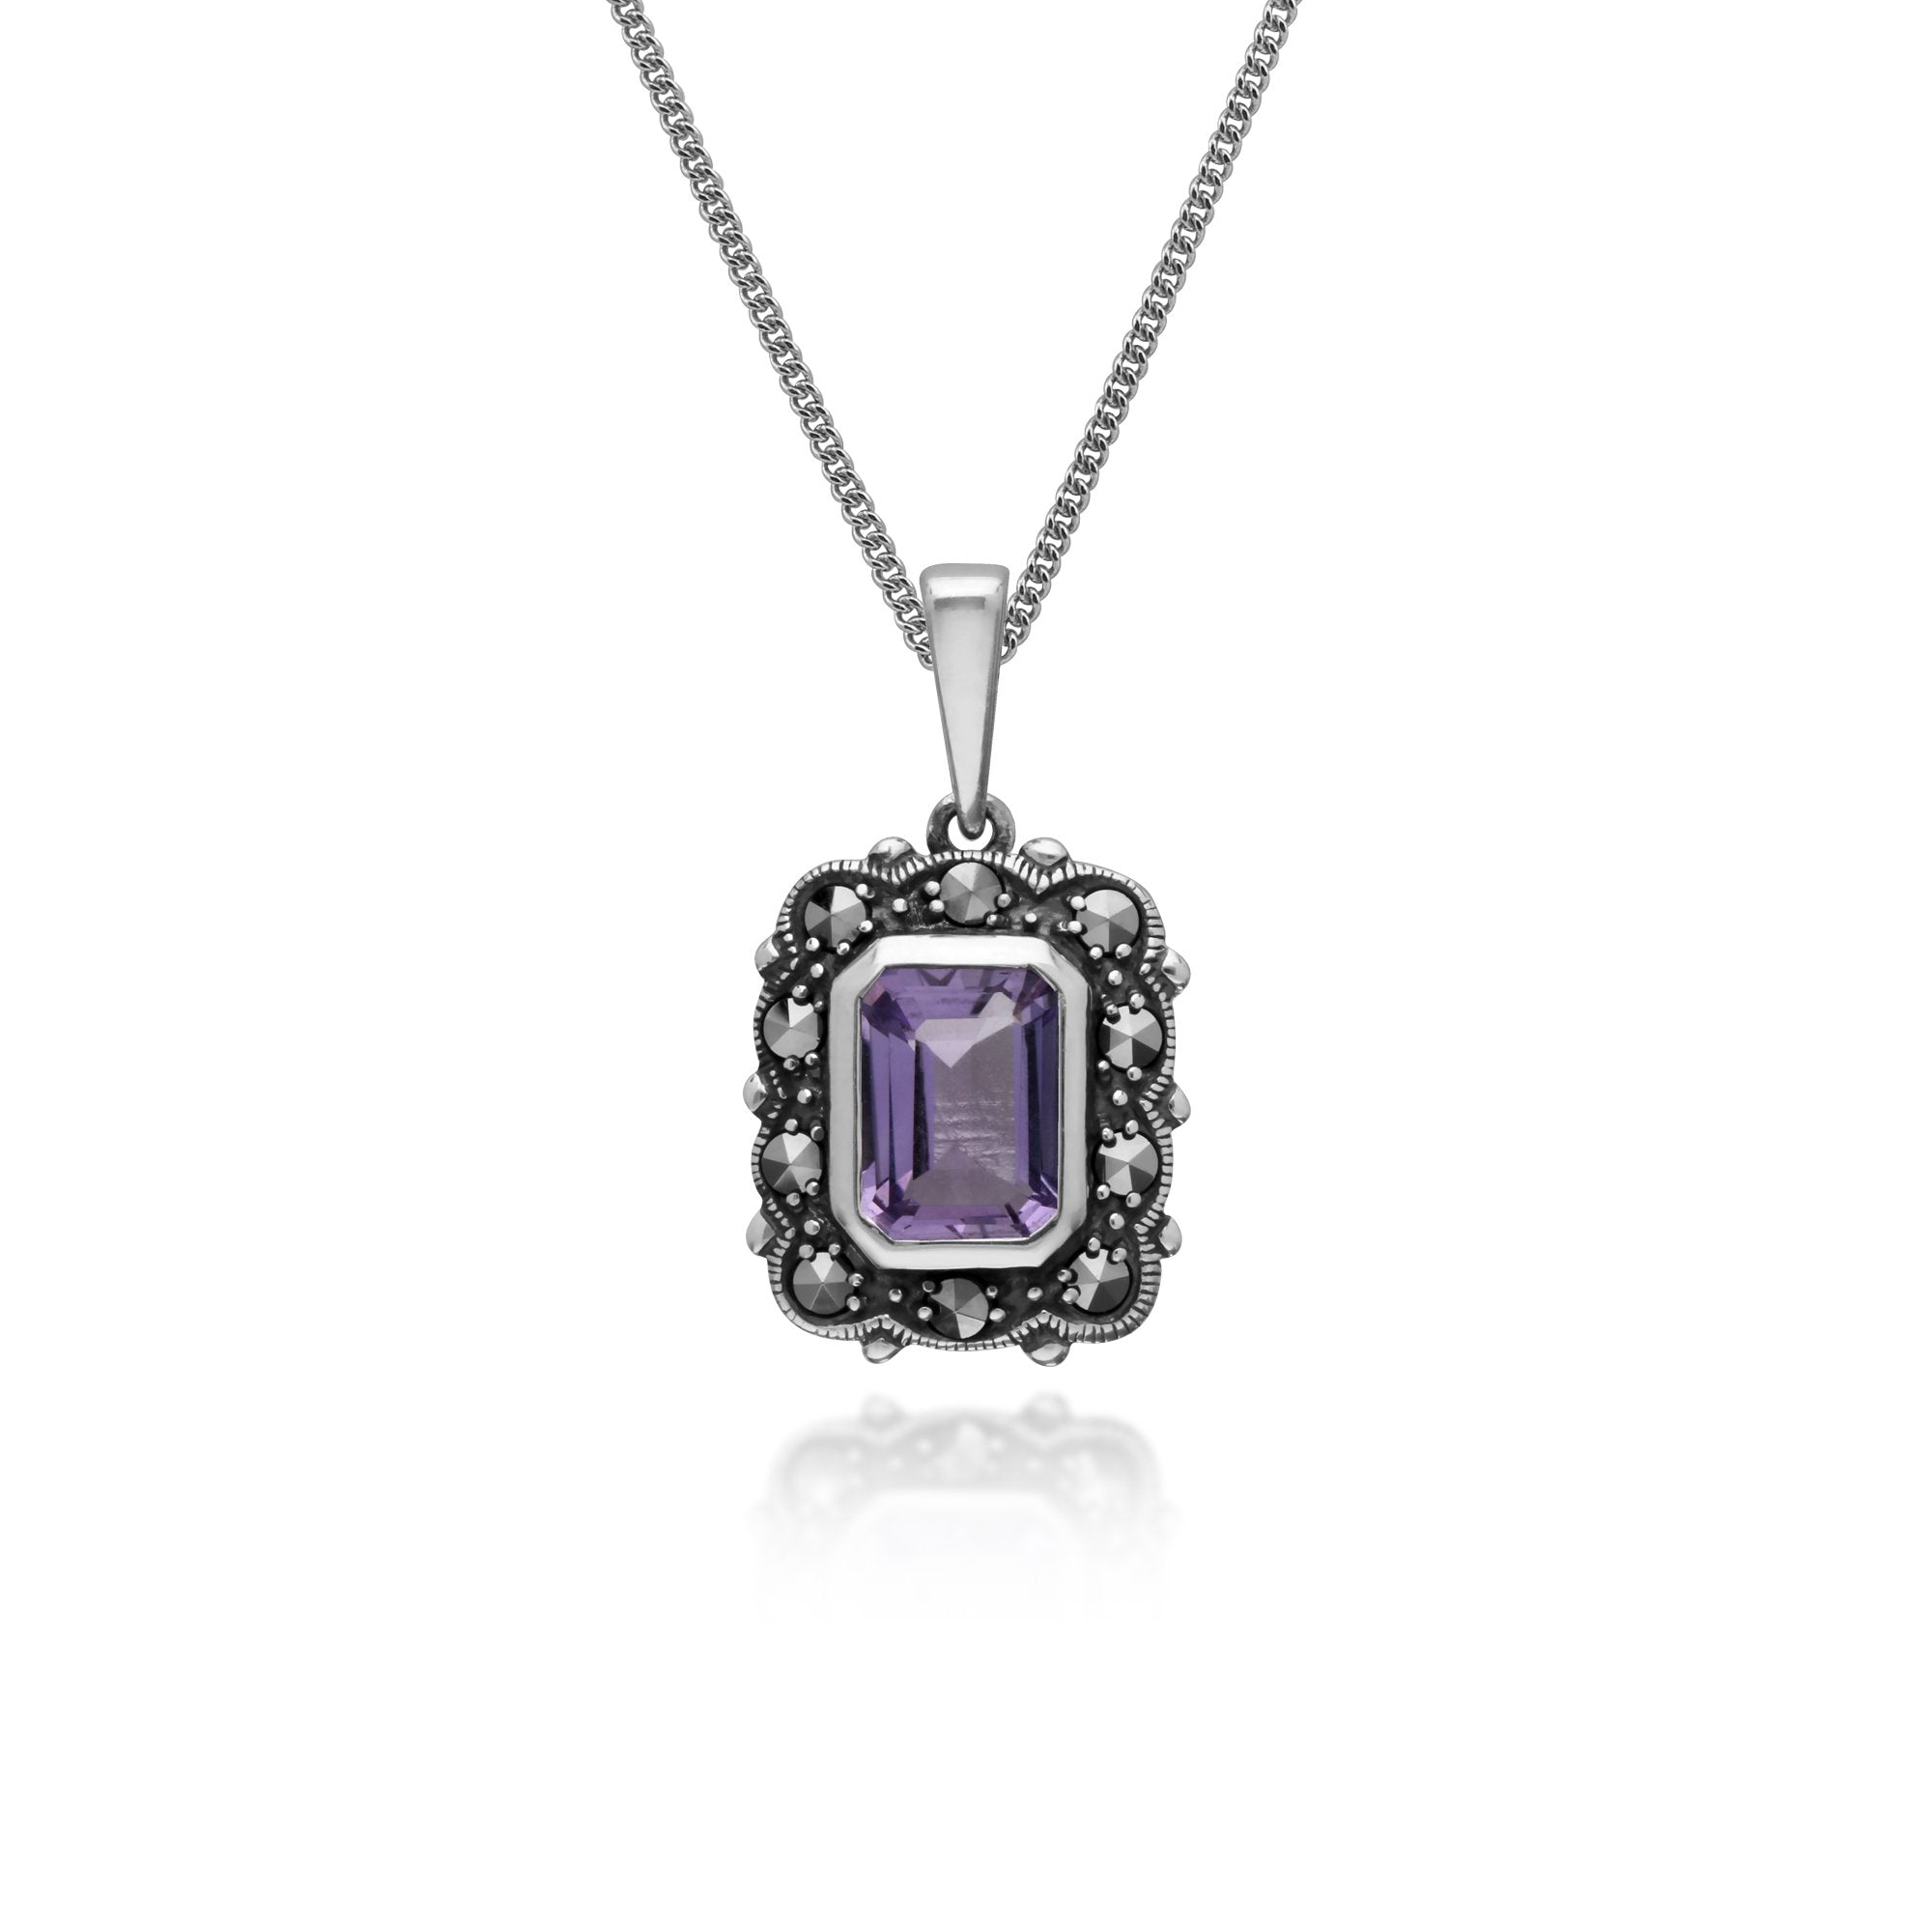 Art Deco Style Octagon Amethyst & Marcasite Pendant in 925 Sterling Silver